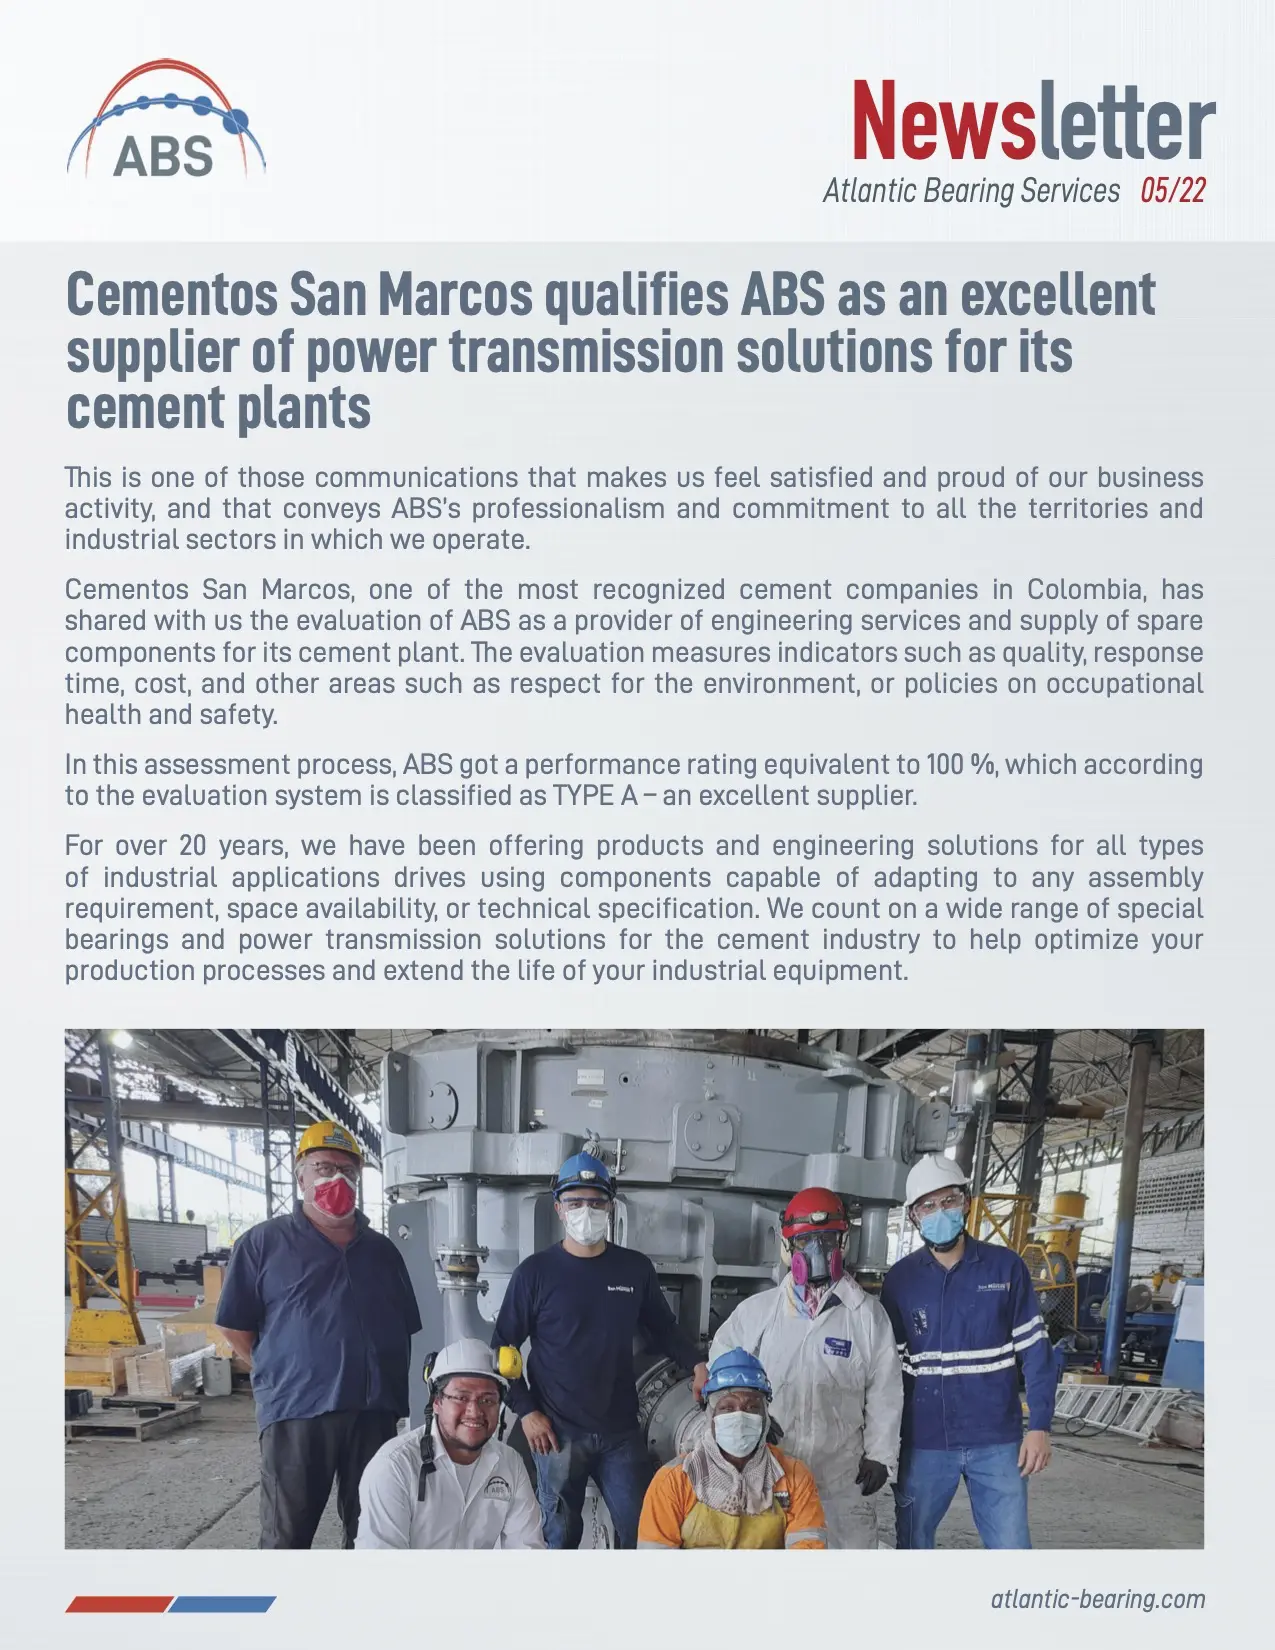 Cementos San Marcos qualifies ABS as an excellent supplier of power transmission solutions for its cement plants